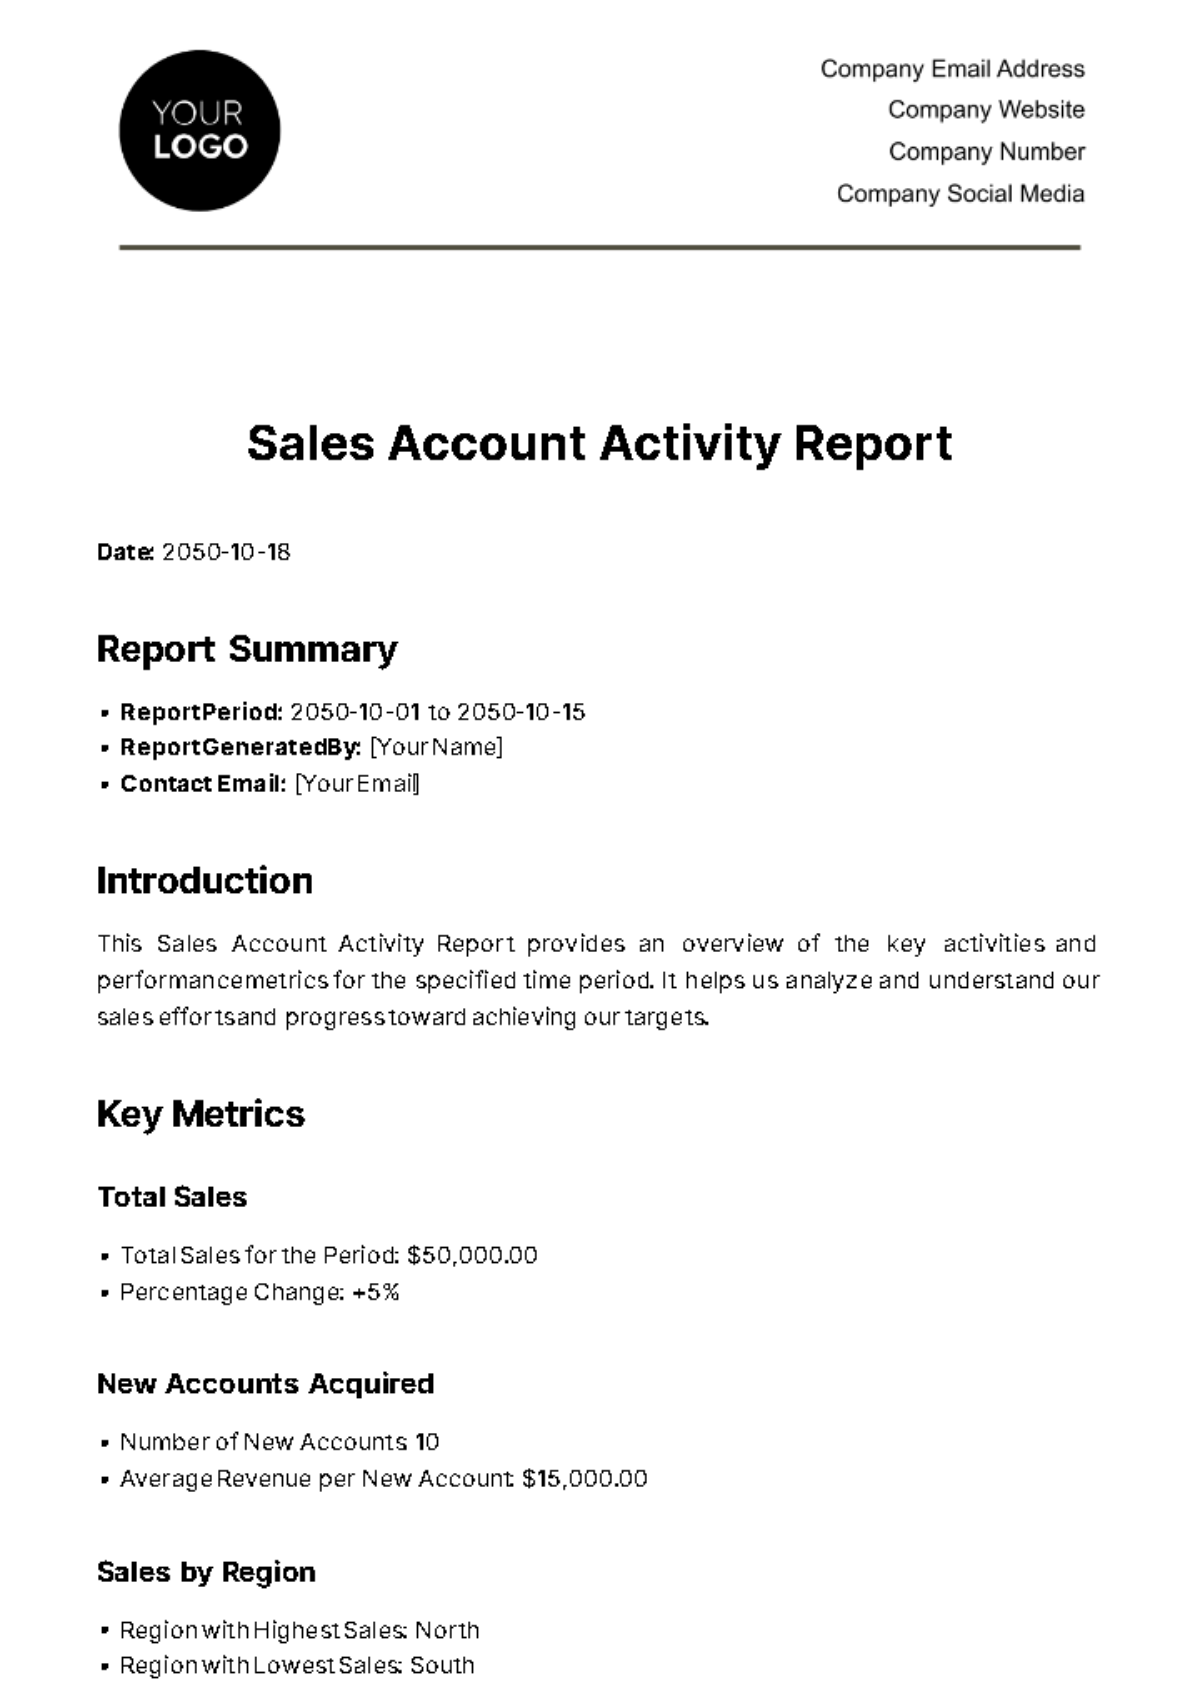 Sales Account Activity Report Template